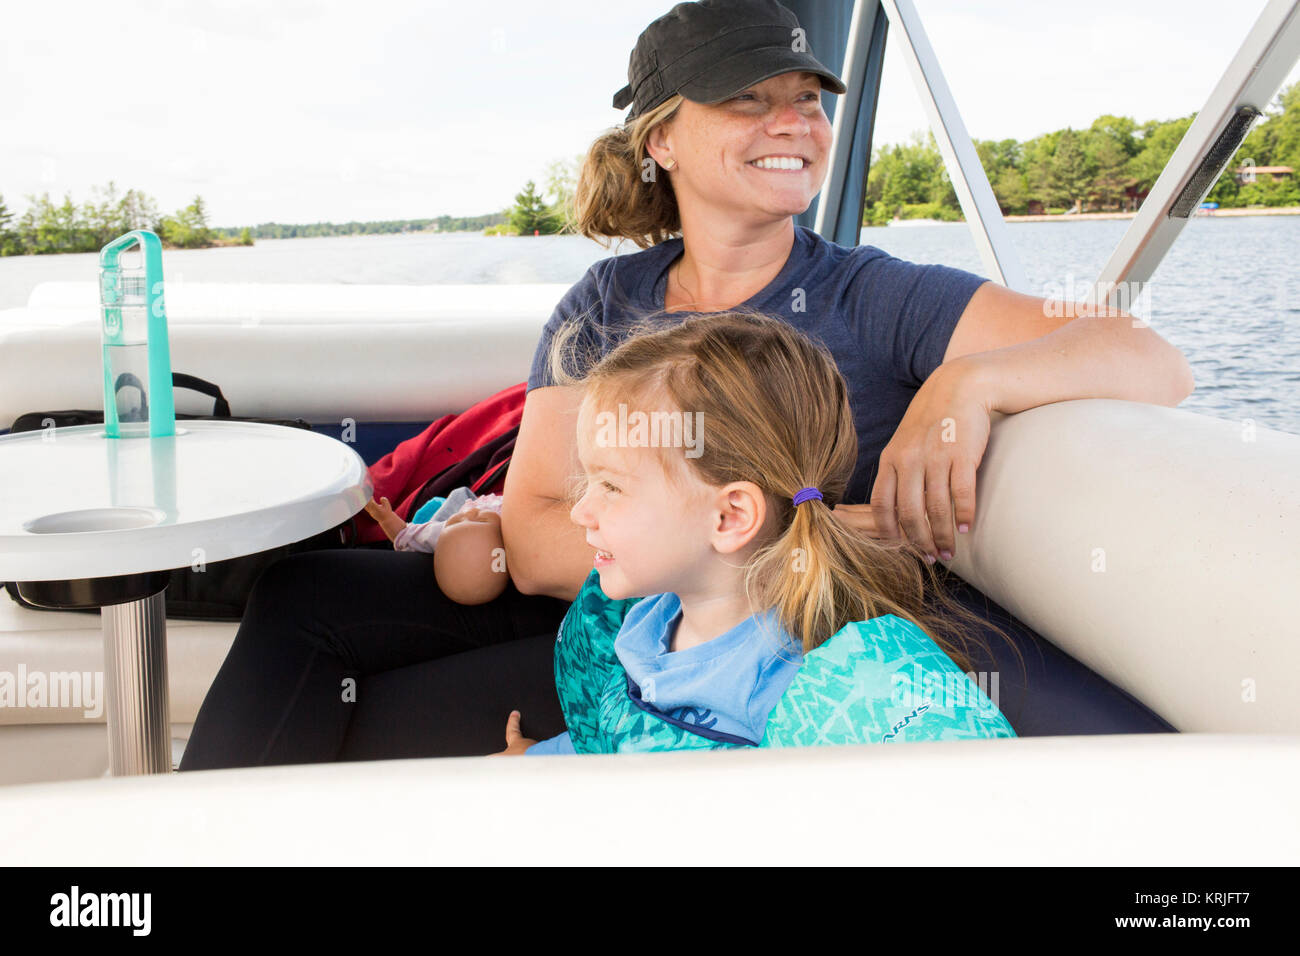 Smiling Caucasian mother and daughter relaxing on boat Stock Photo